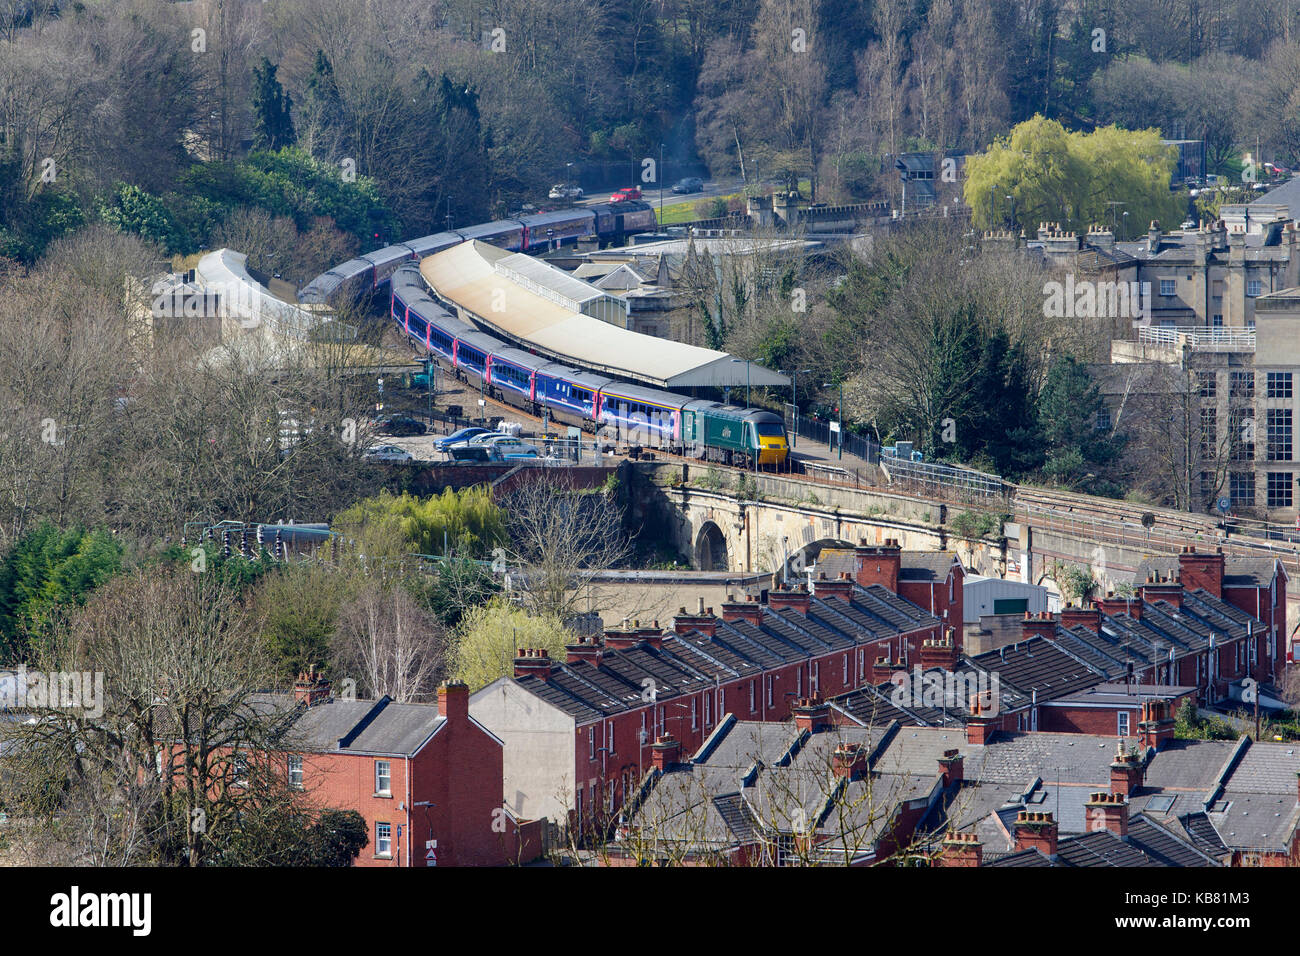 Great Western Railway train trains are pictured arriving and departing from Bath spa railway station in Bath, Somerset, England, UK Stock Photo